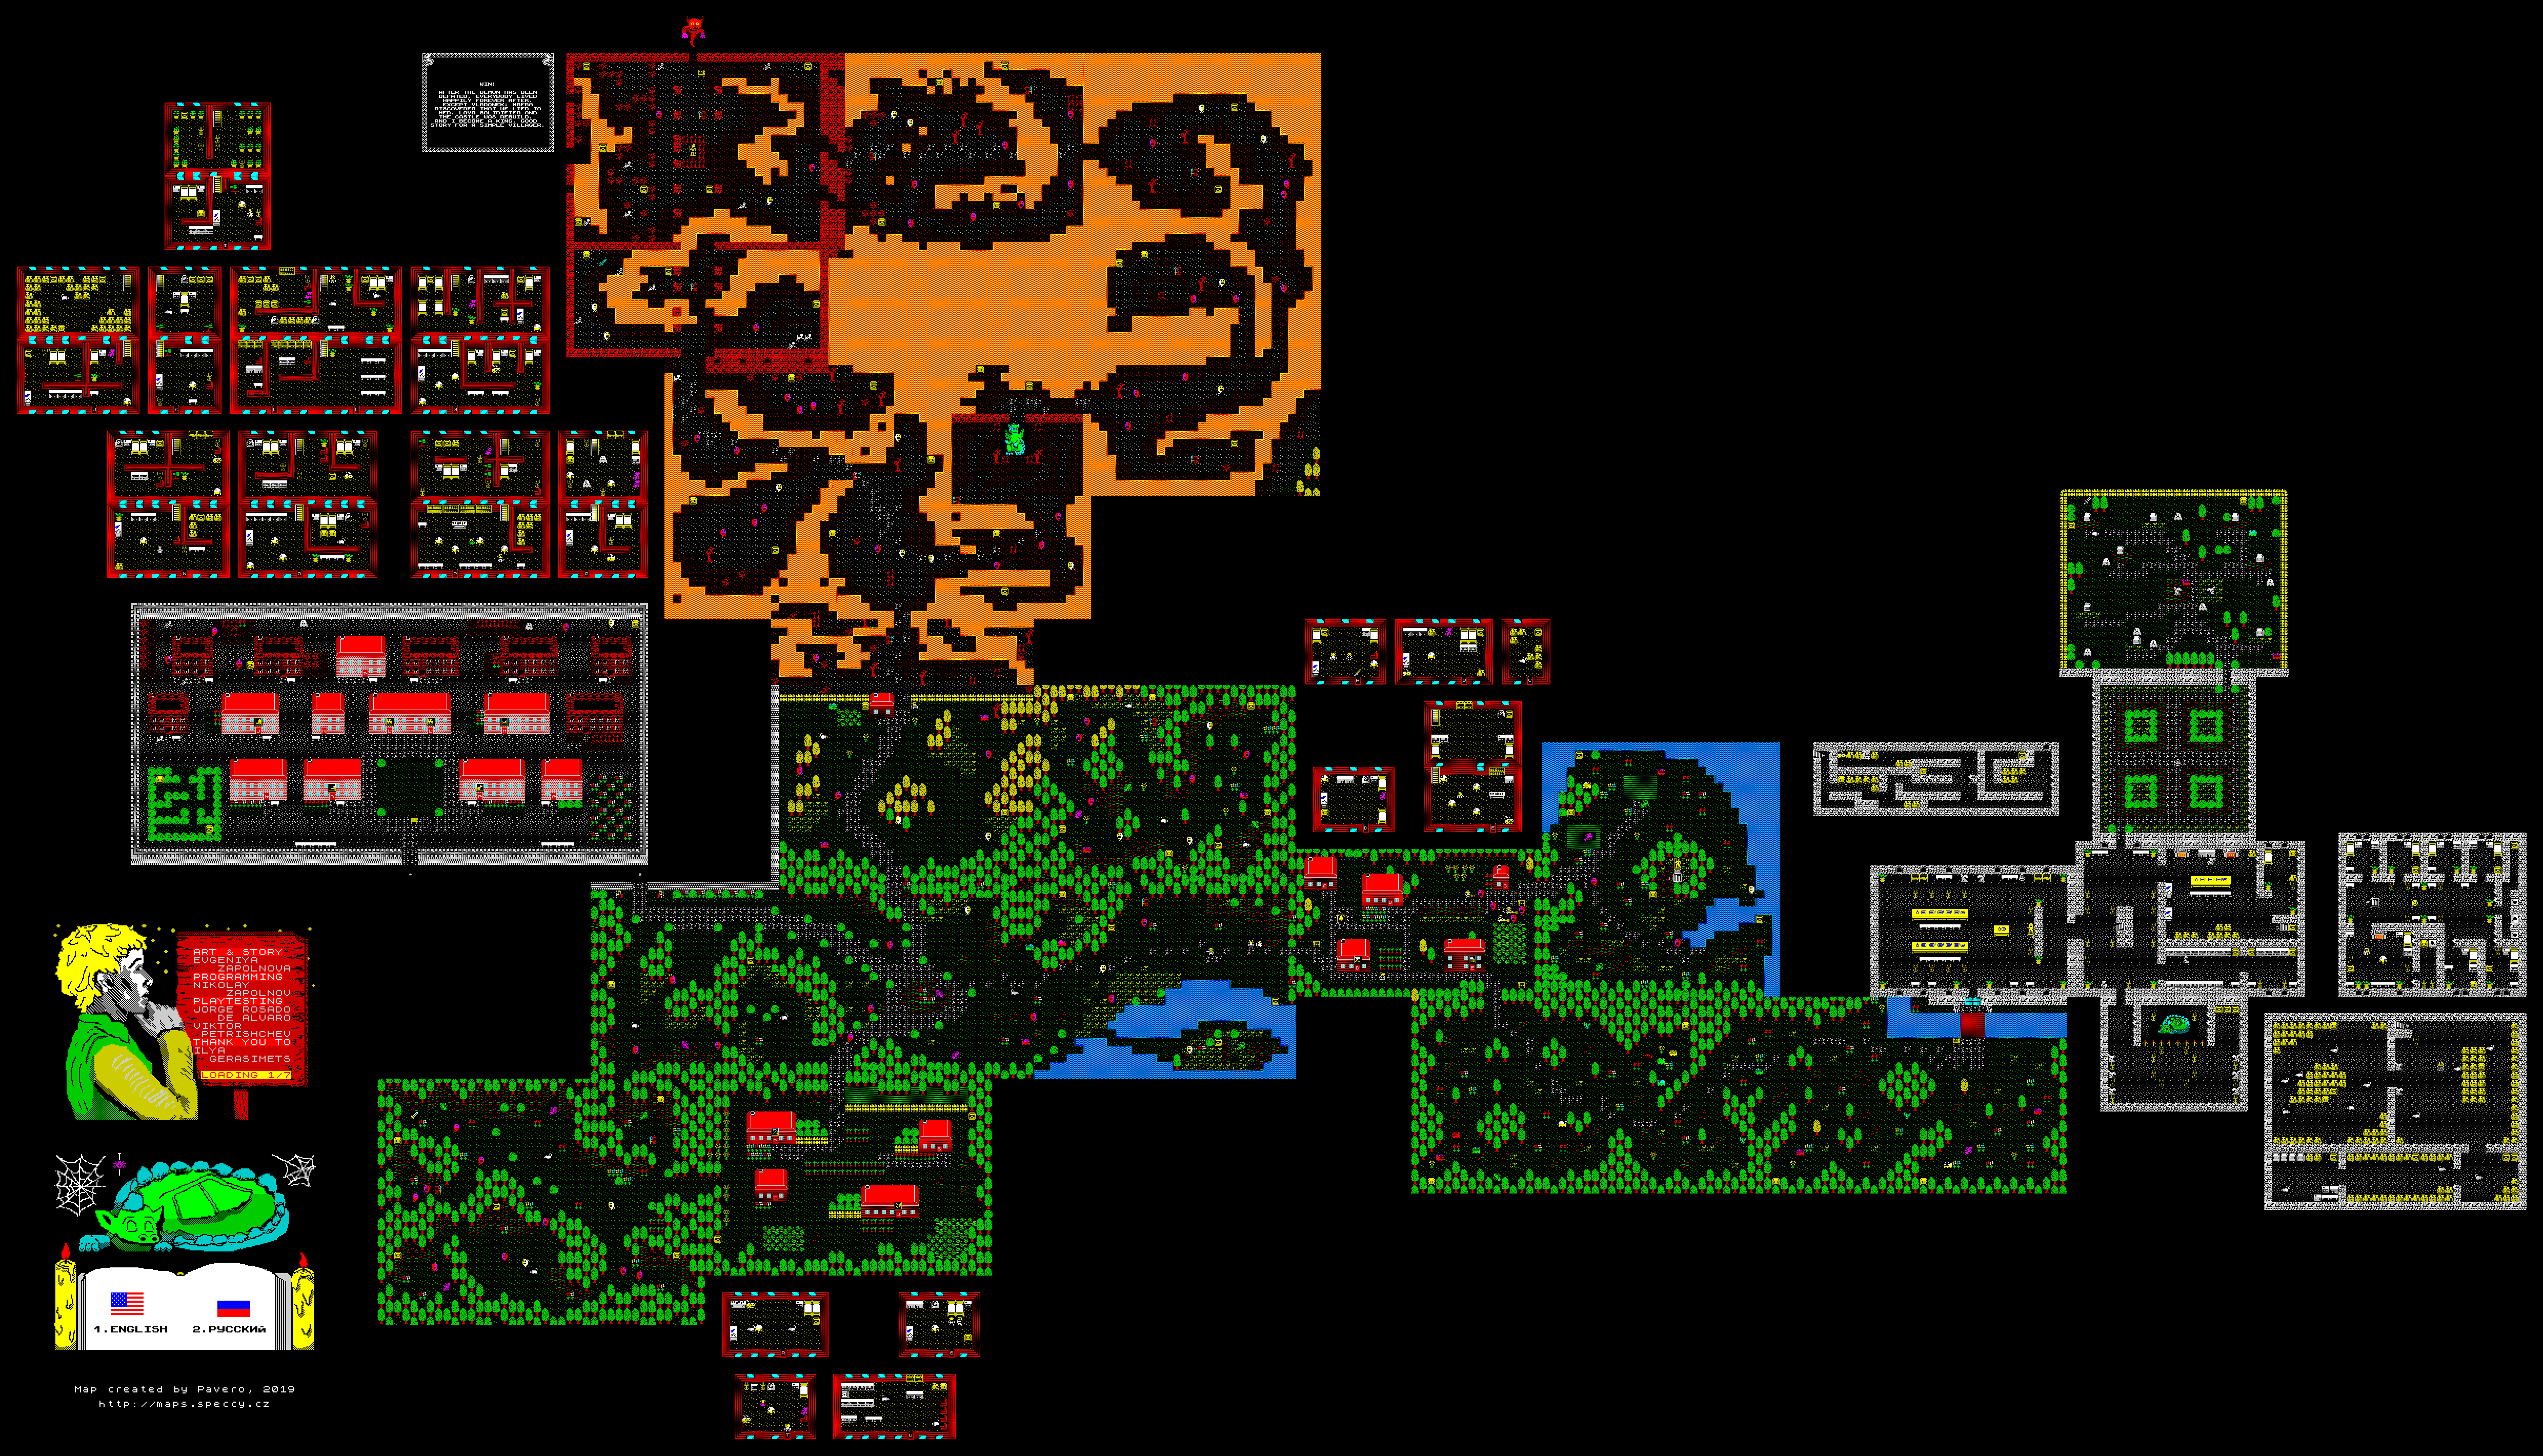 Order of Sleeping Dragon - The Map